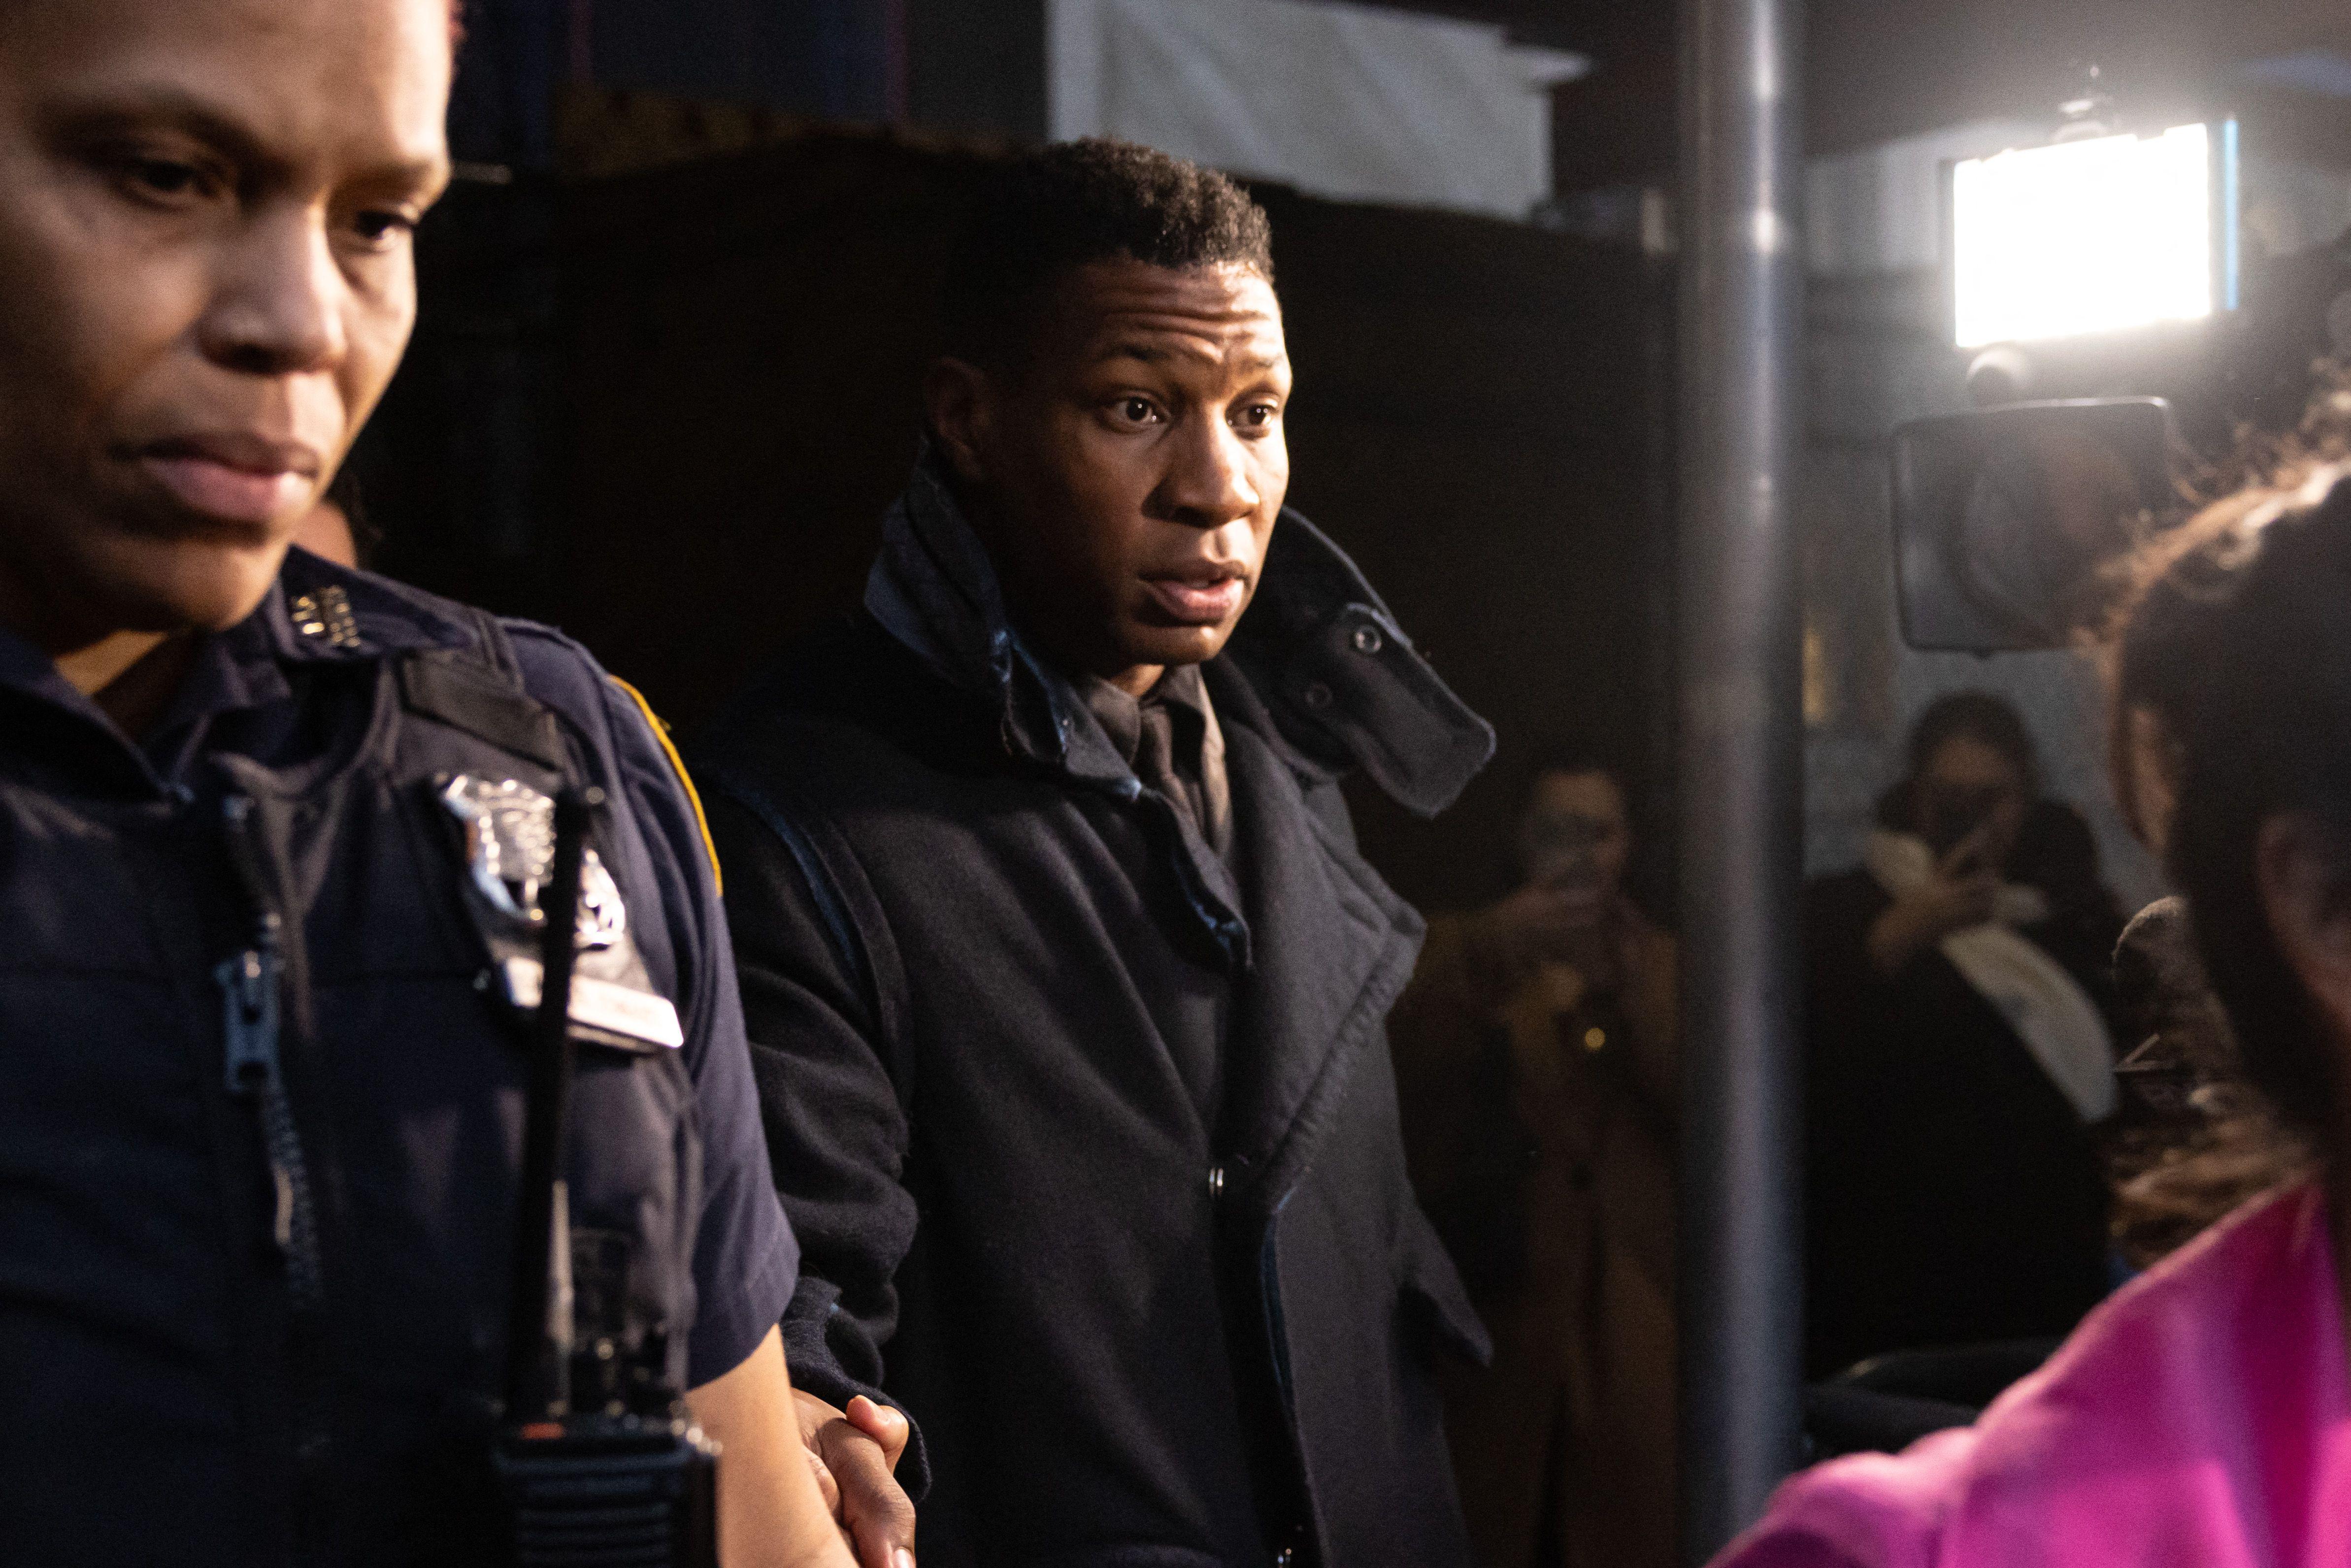 Marvel “releases” Jonathan Majors after being convicted of assault